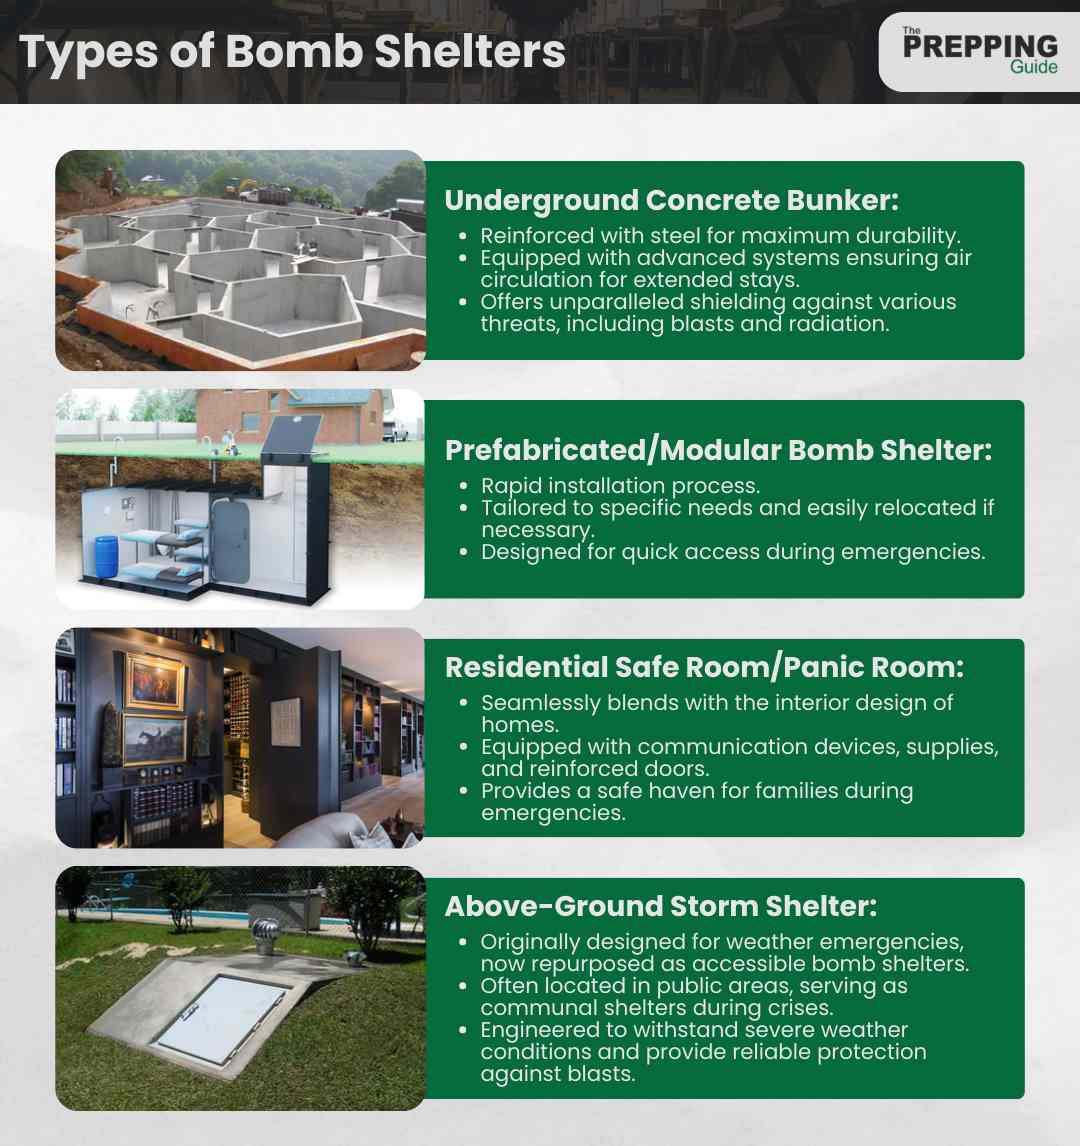 Types of bomb shelters you can build.